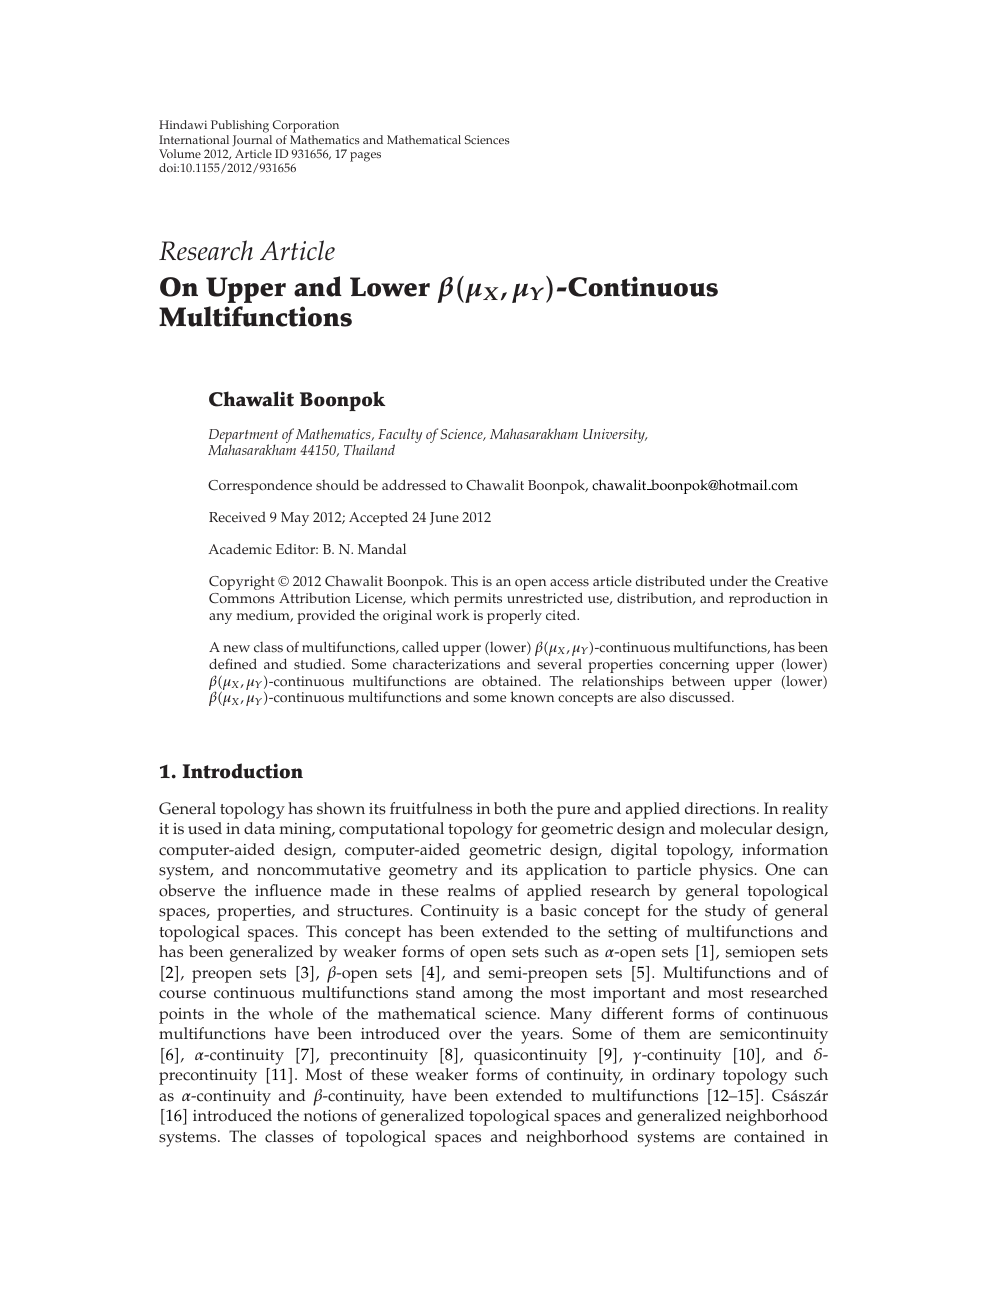 On Upper And Lower 𝛽 𝜇𝑋 𝜇𝑌 Continuous Multifunctions Topic Of Research Paper In Mathematics Download Scholarly Article Pdf And Read For Free On Cyberleninka Open Science Hub